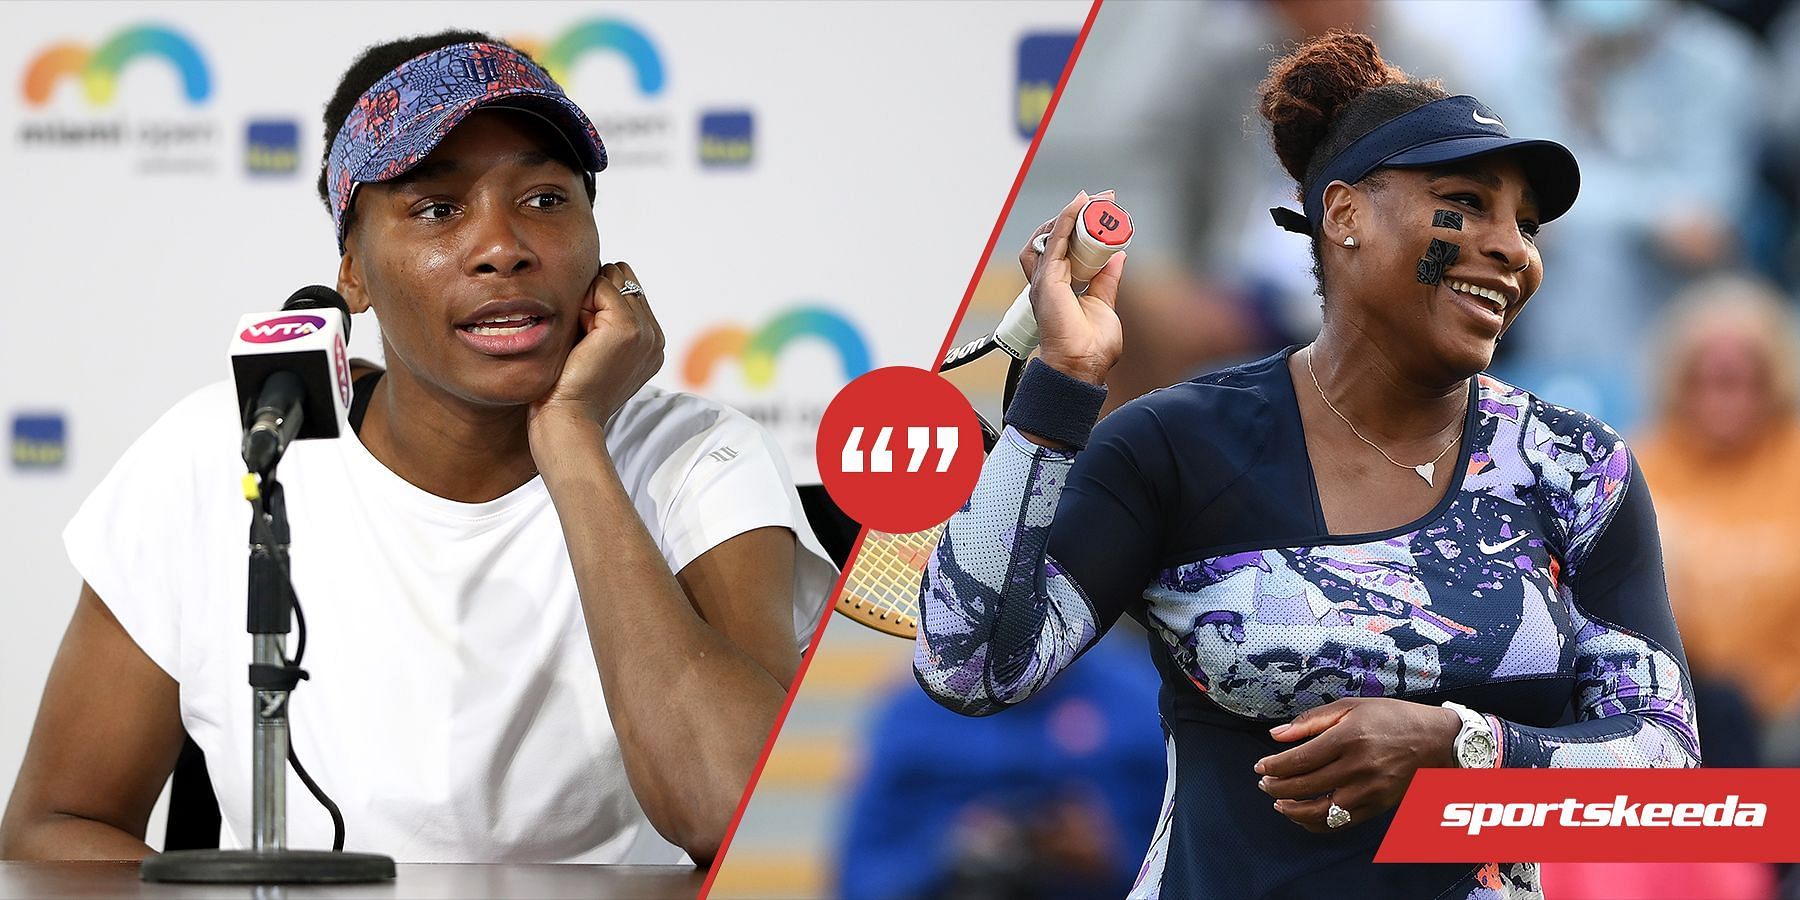 Venus Williams (L) names Serena Williams as the player she learns from the most.